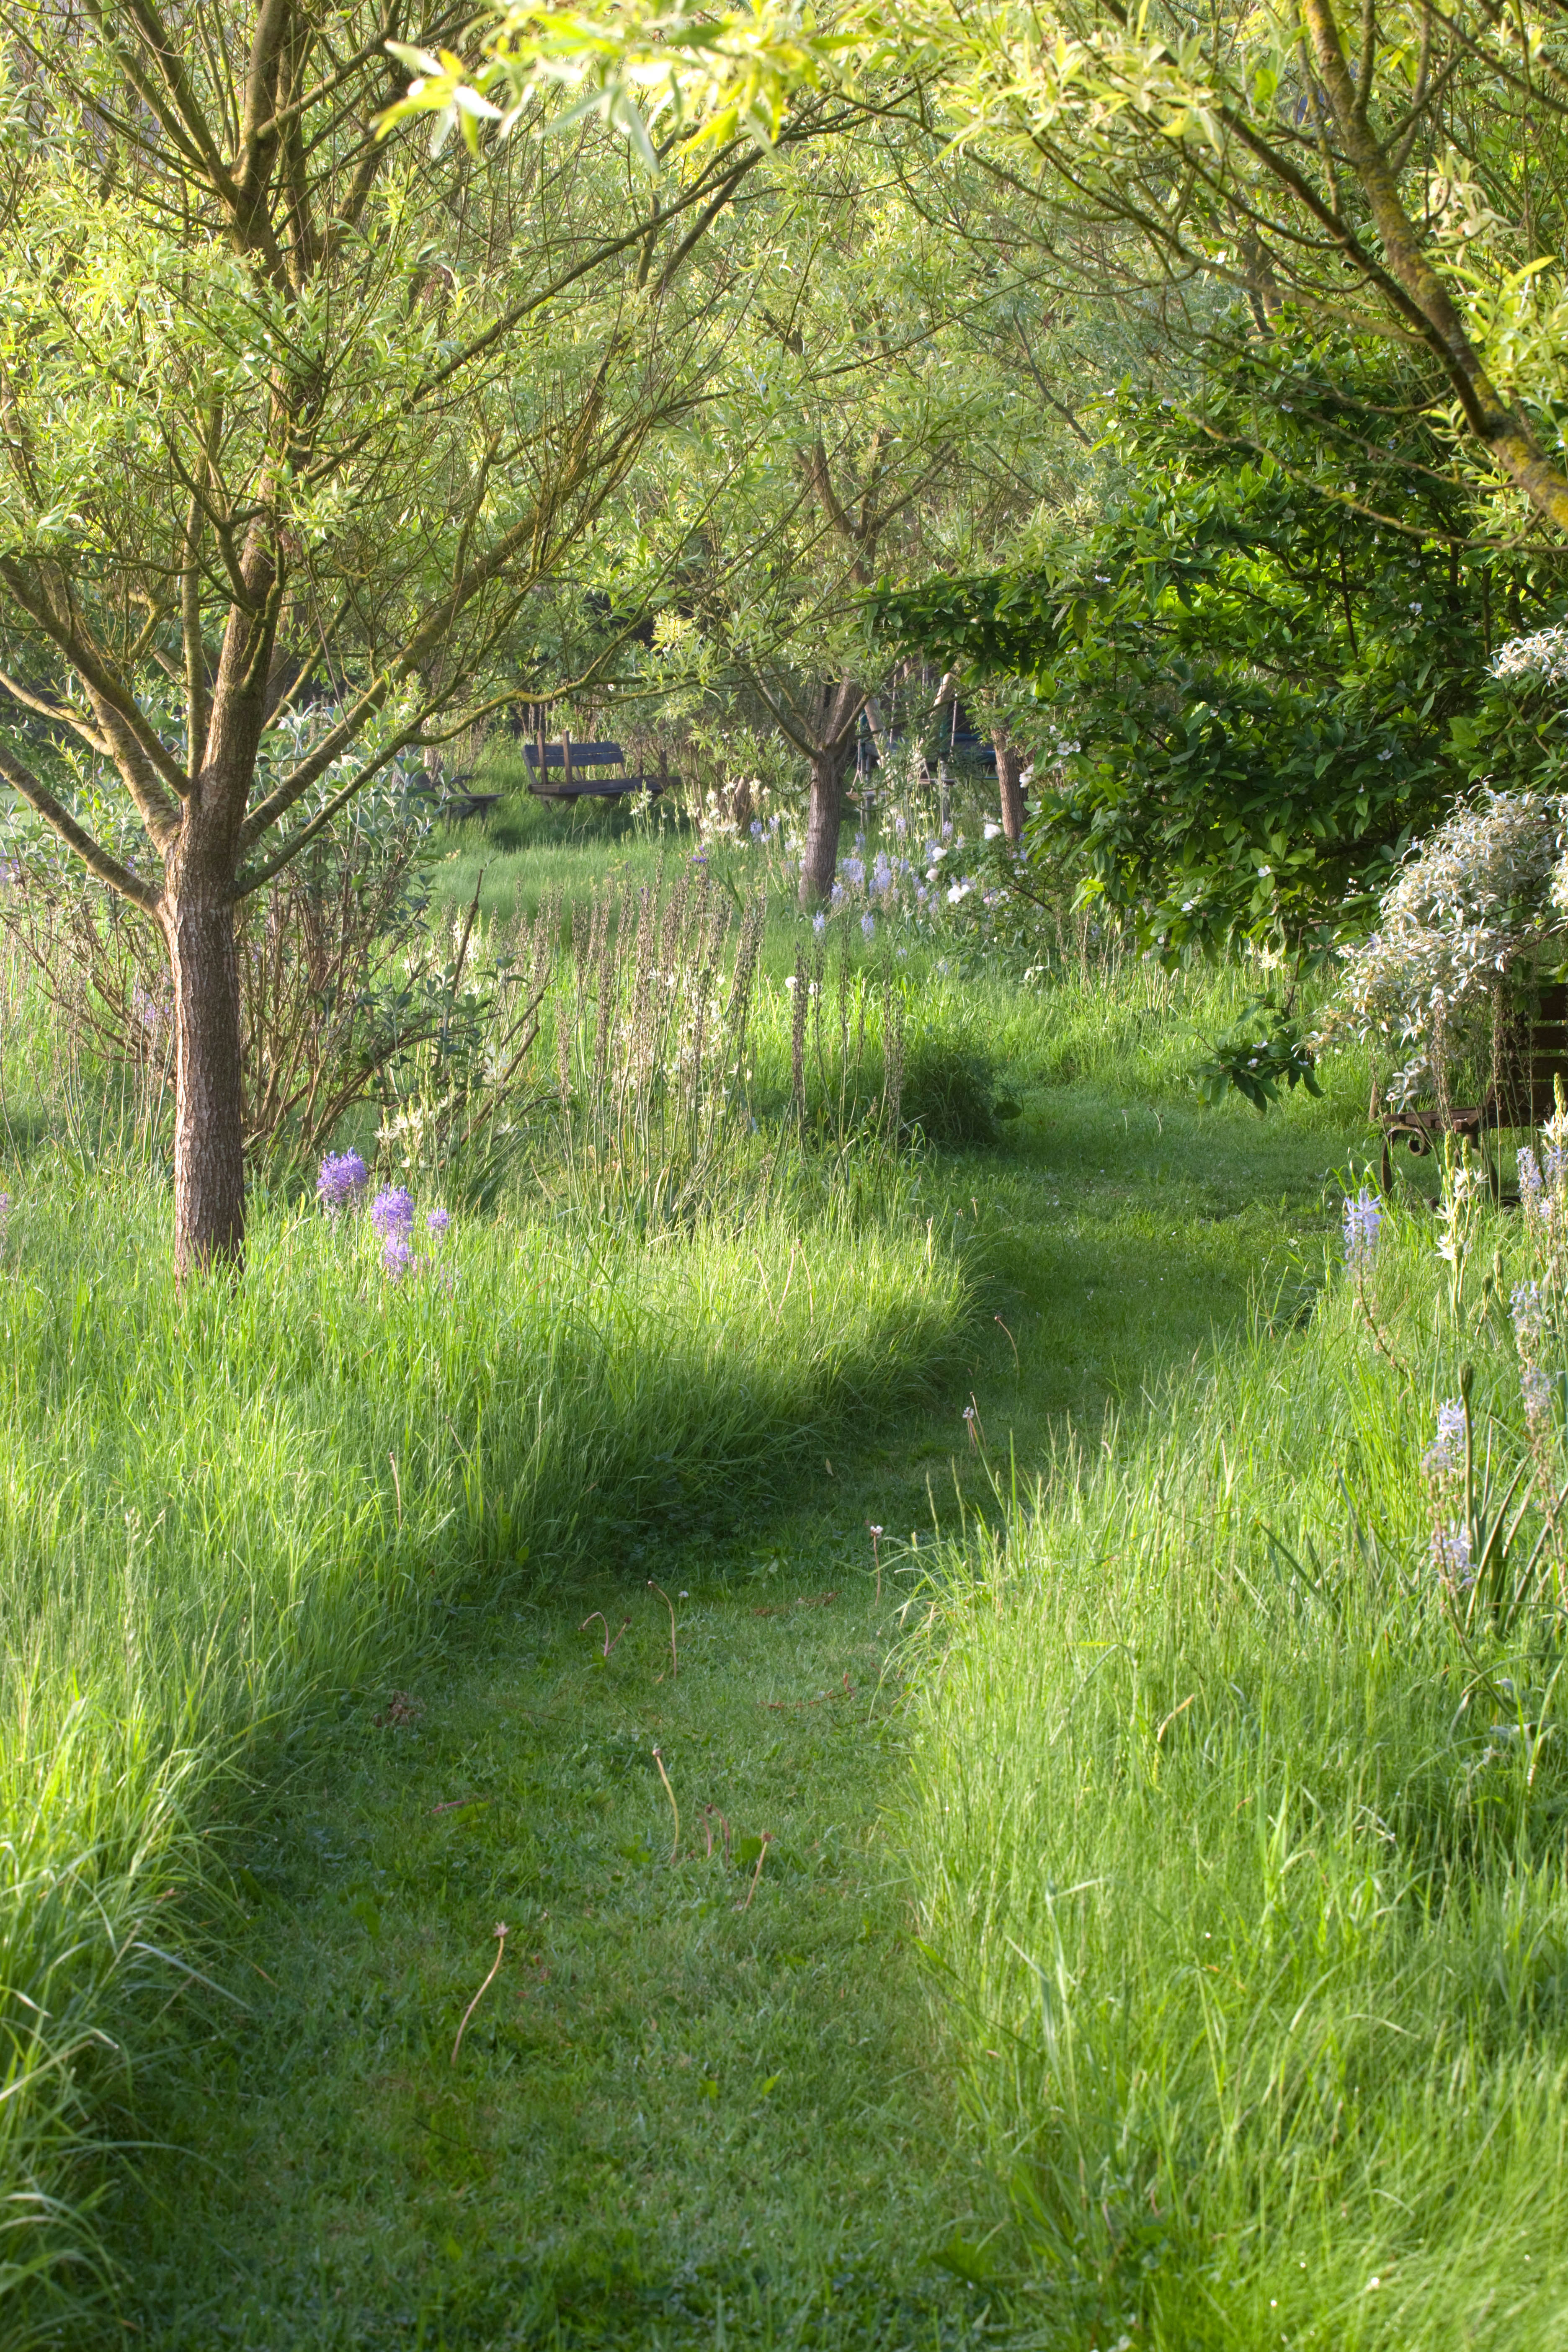 A winding garden path through meadow grasses lined with purple wild flowers.